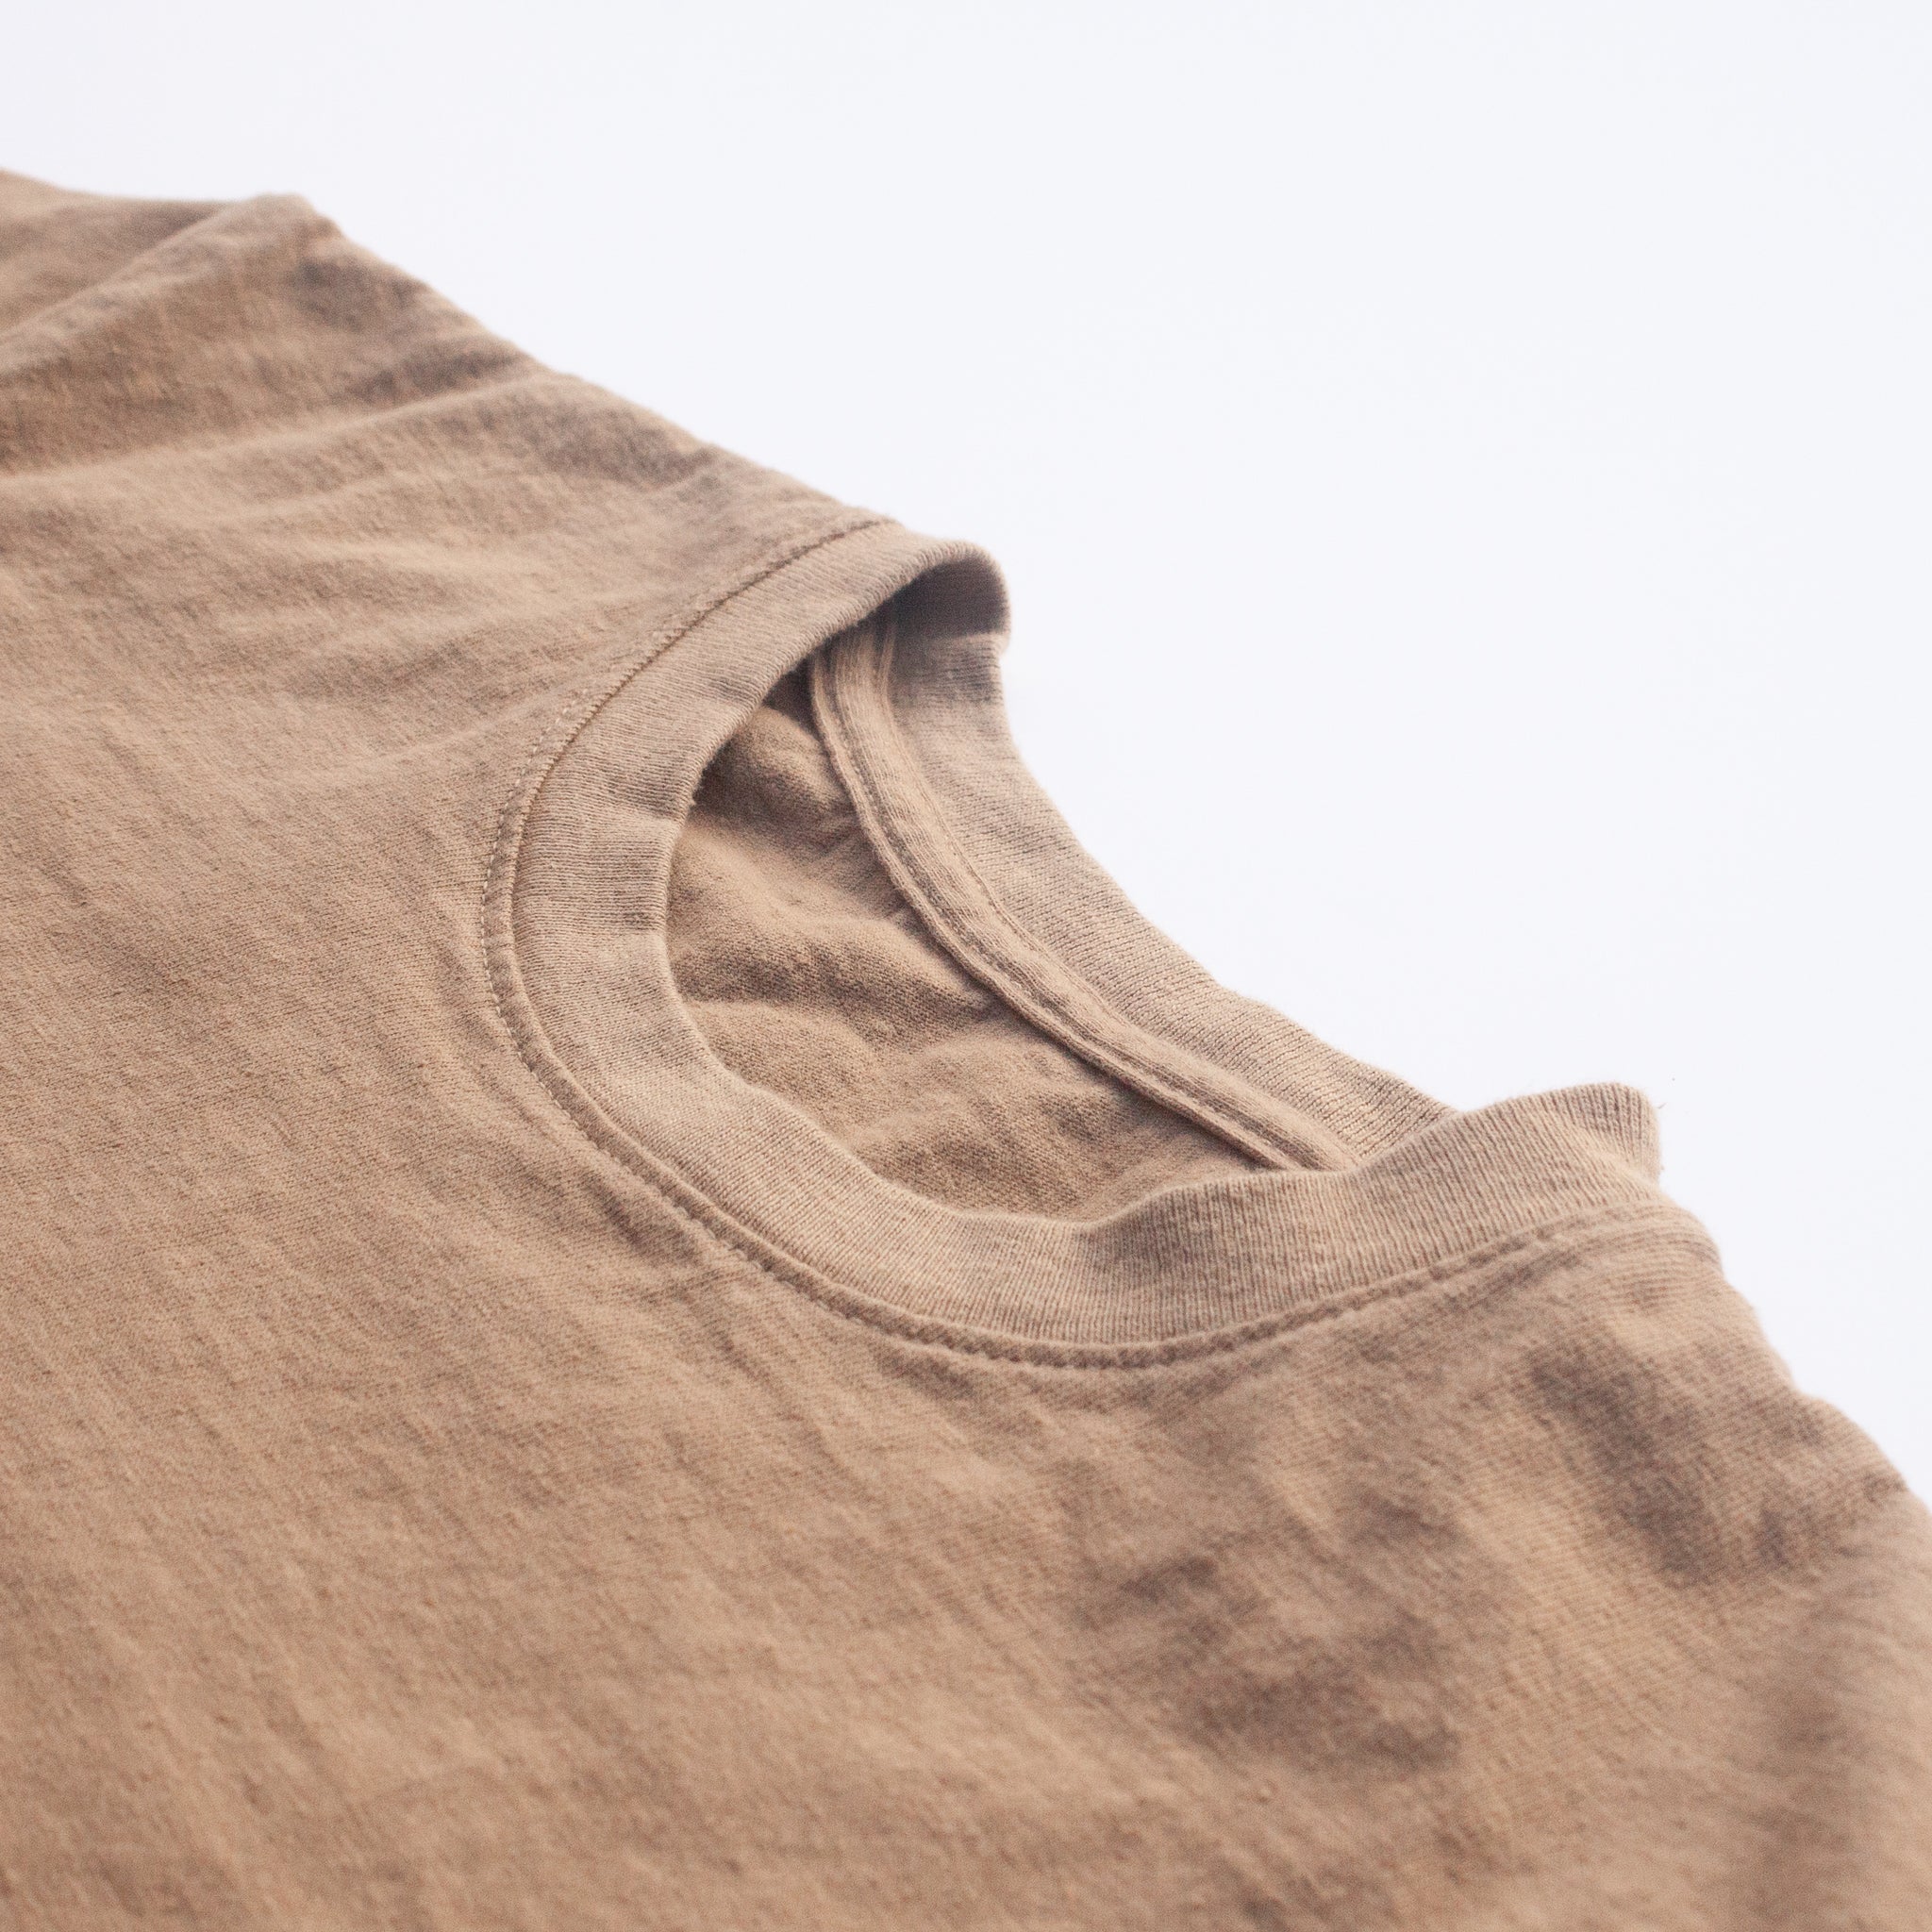 A close up photo of the collar of the American-made Solid State Clothing North Carolina Black Walnut Shirt